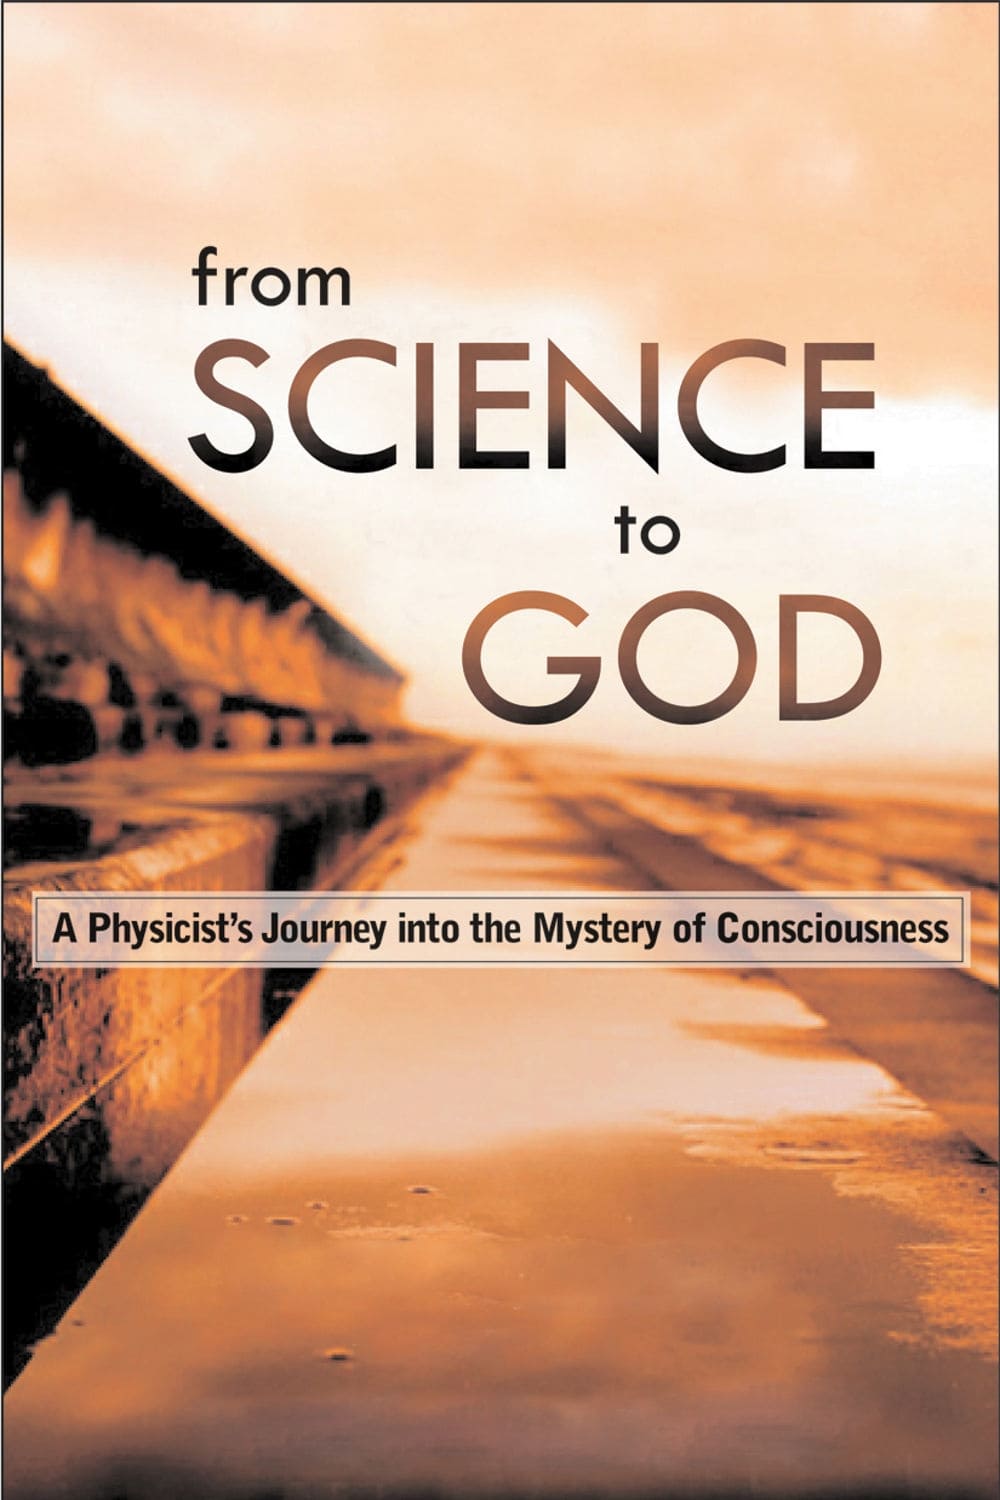 From Science to God: Exploring the Mystery of Consciousness